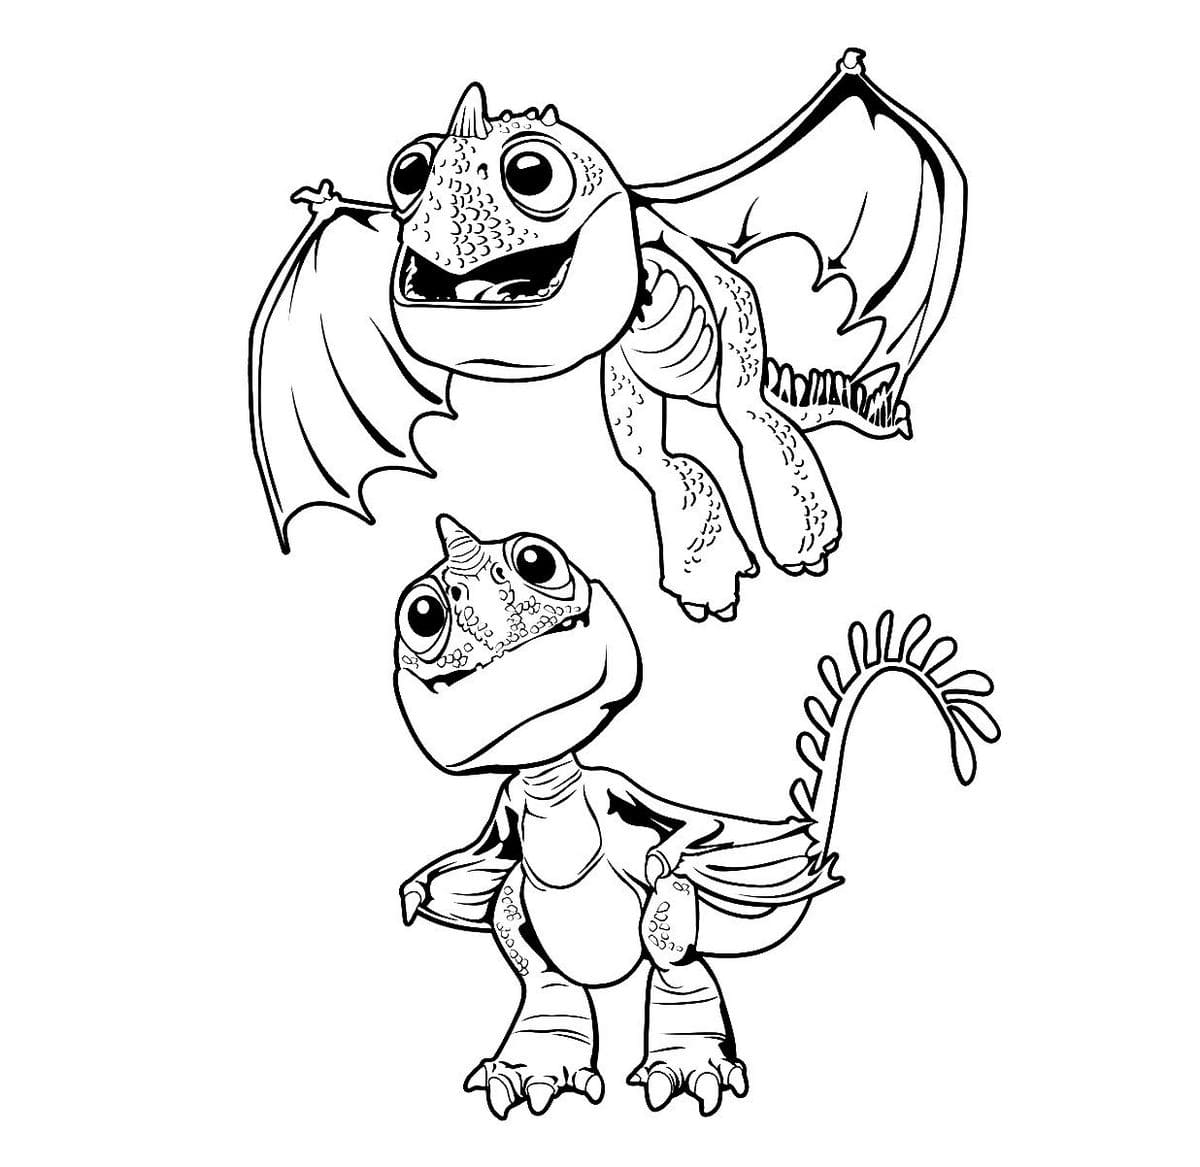 Coloring page How to Train Your Dragon 3 Cute Dragons